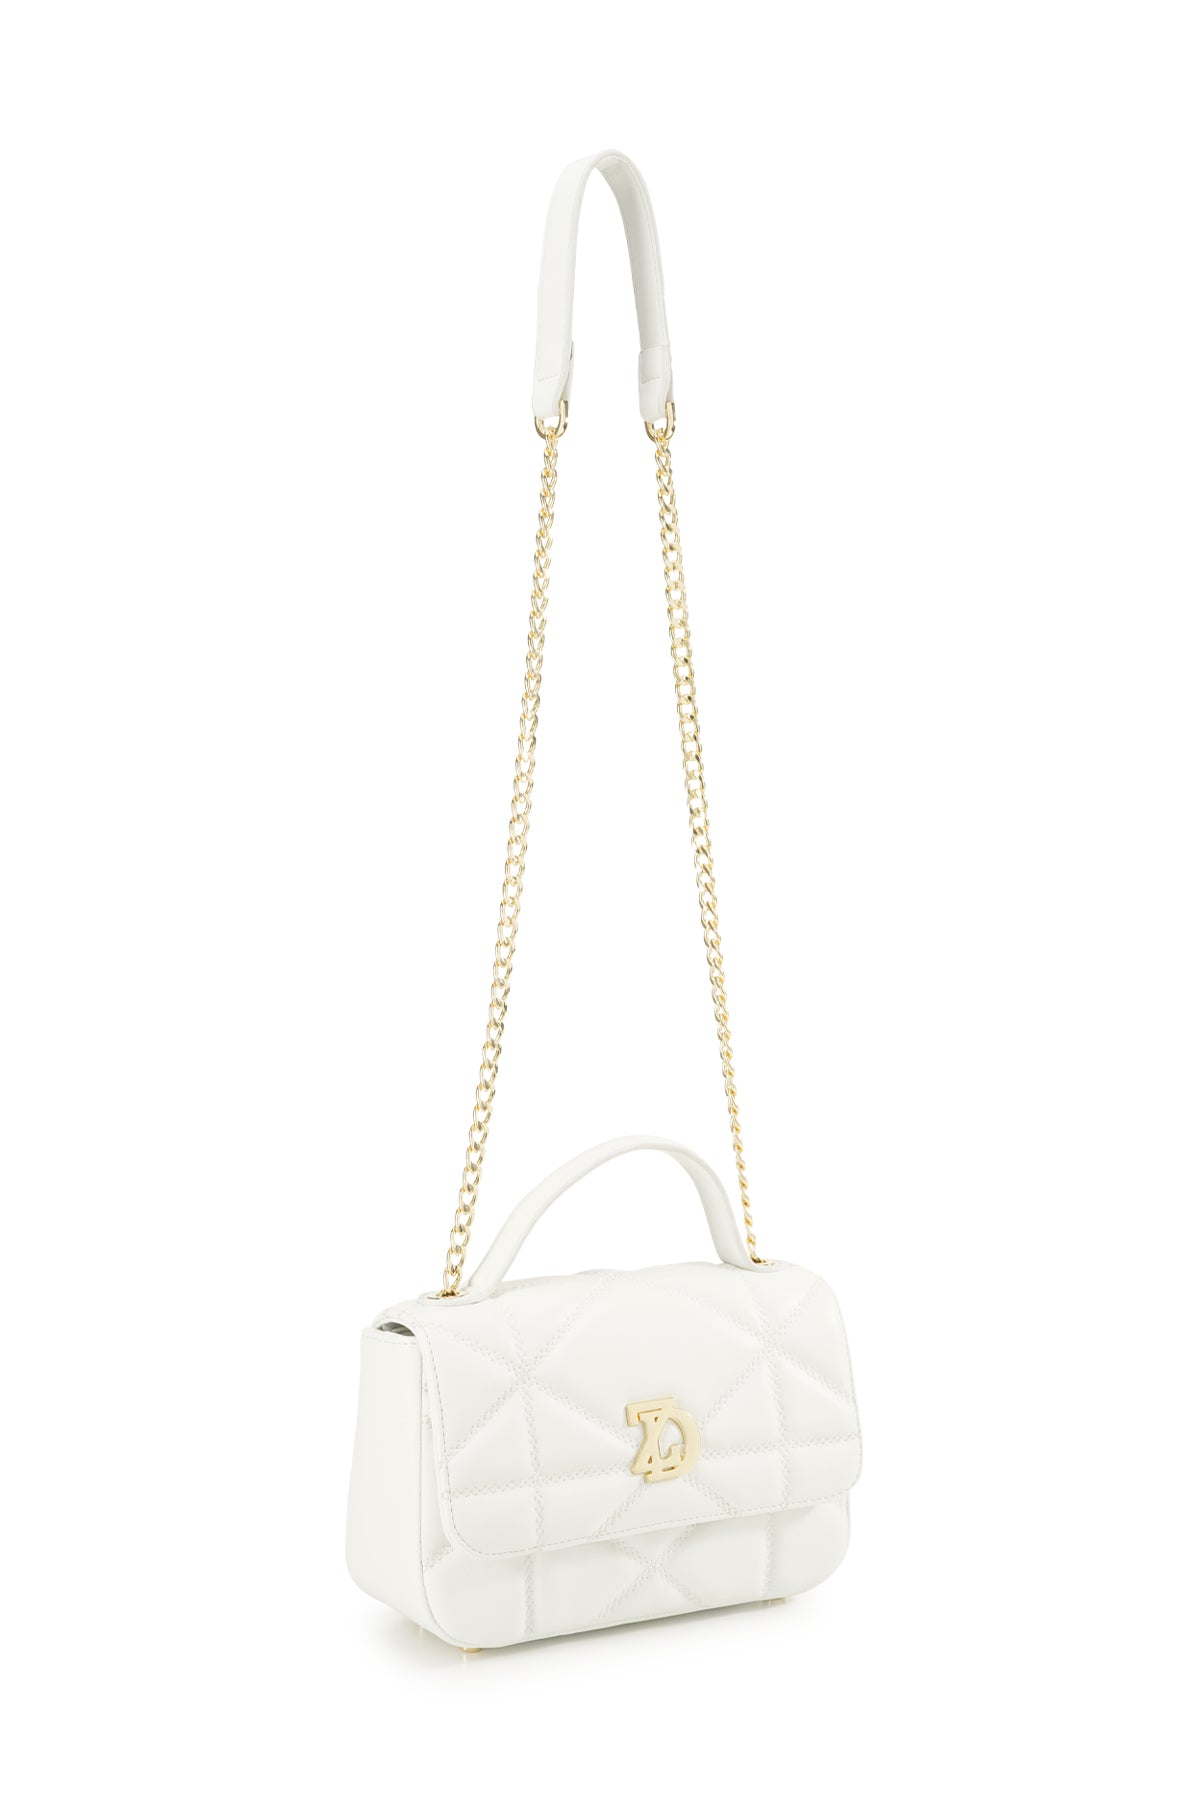 Tally Bags - Ivory